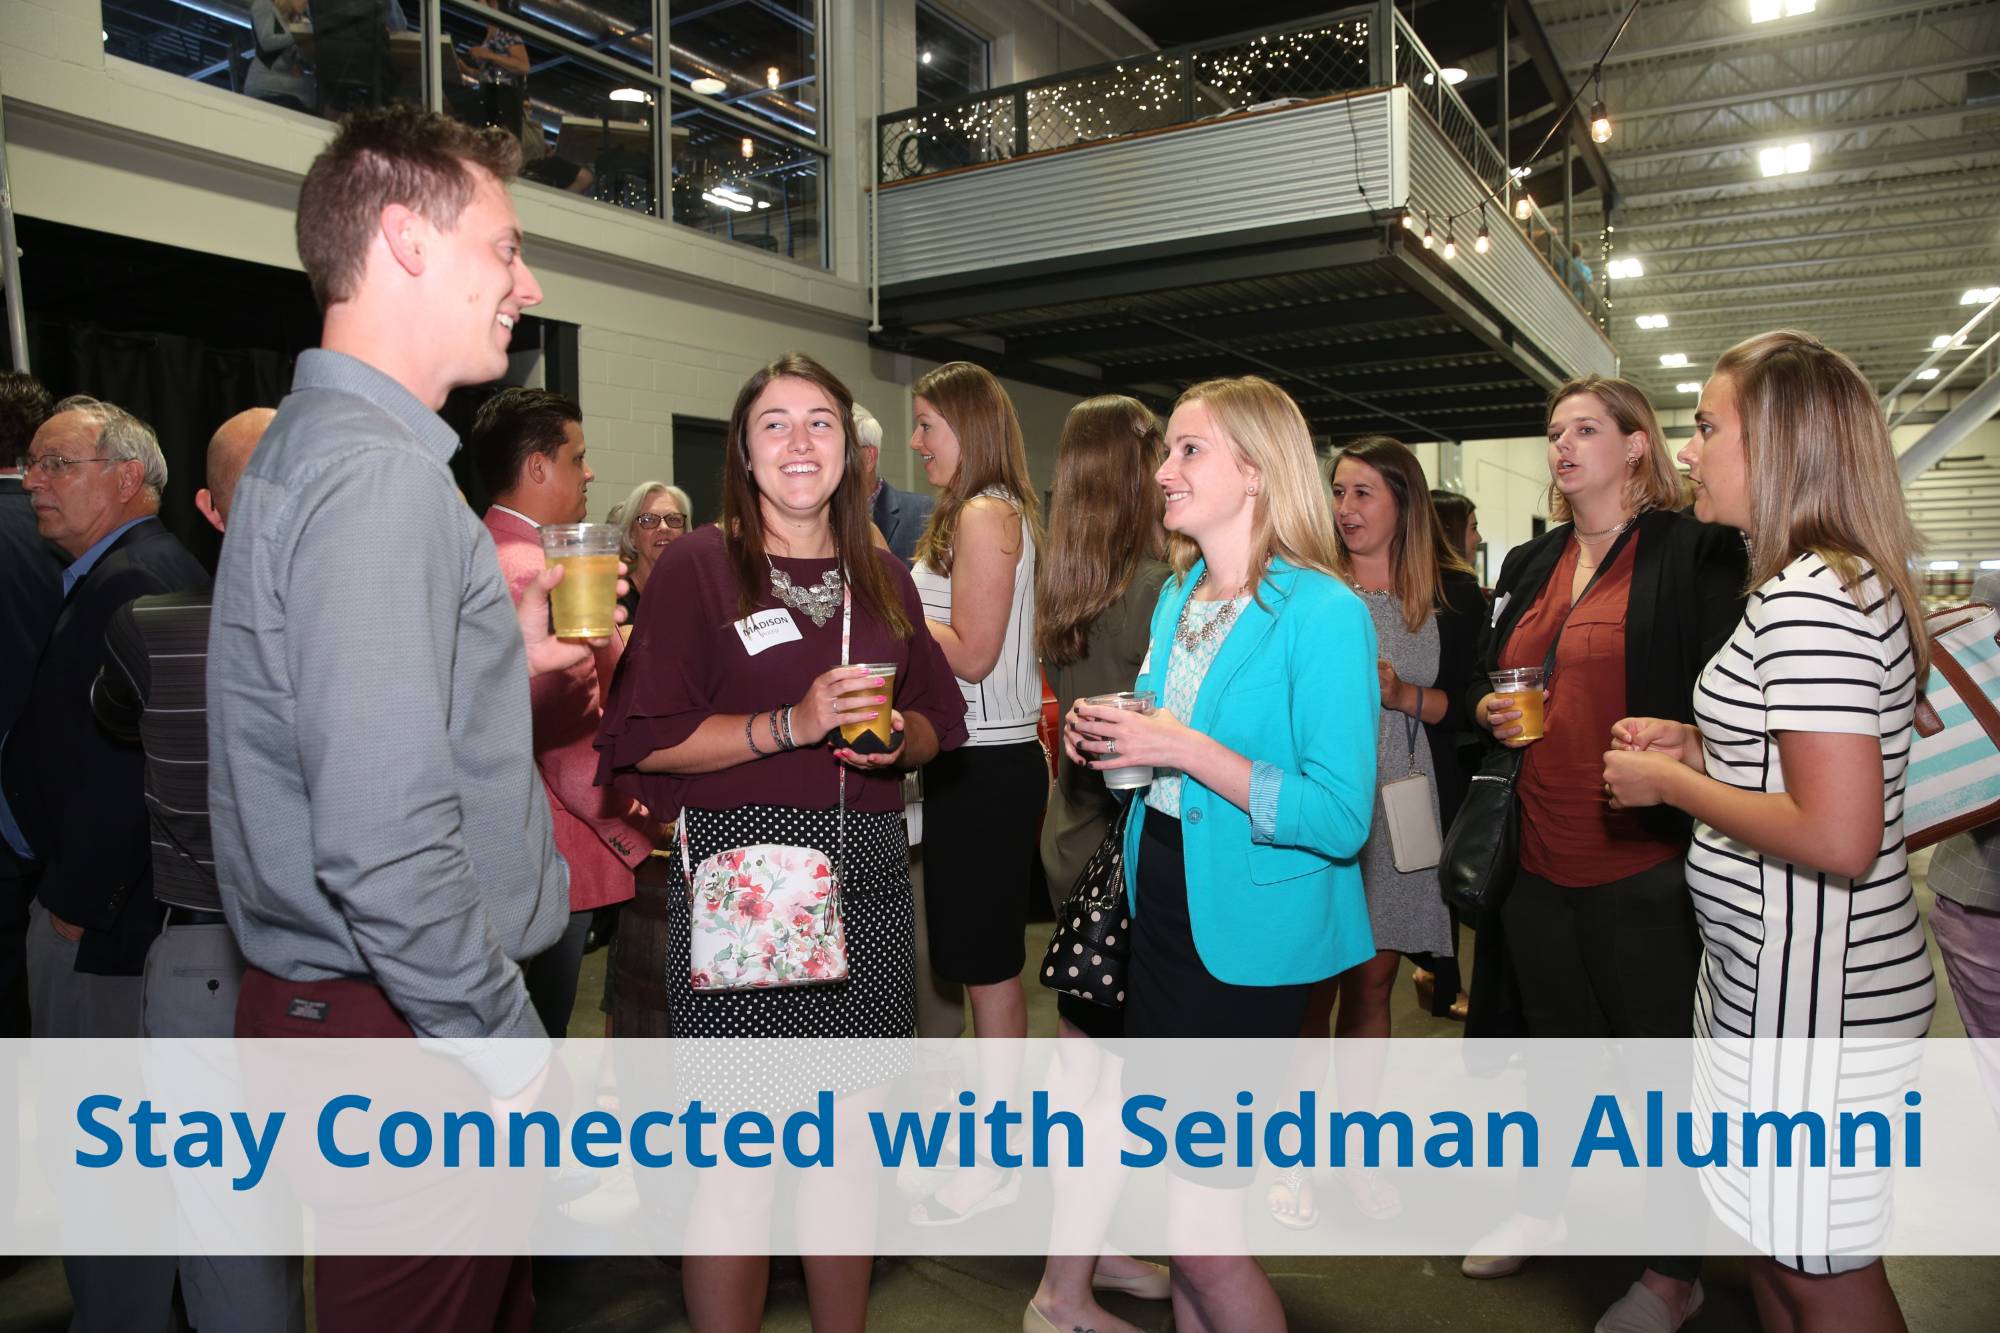 Stay Connected with Seidman Alumni - Alumni networking